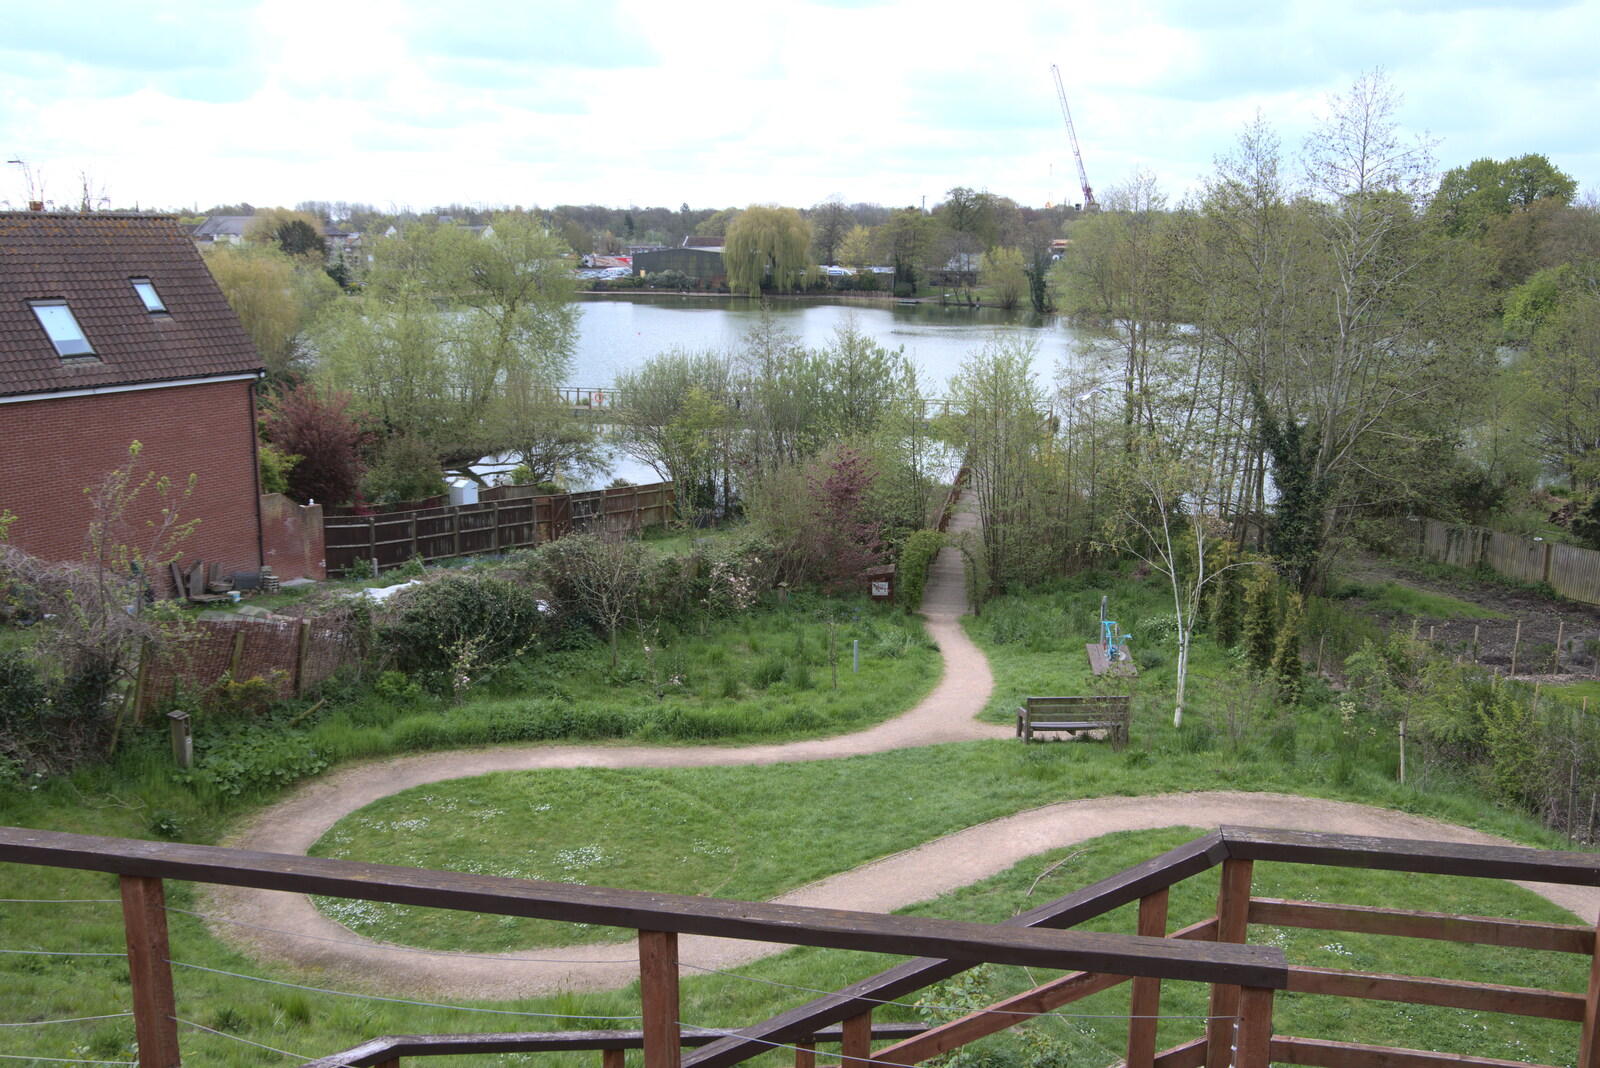 The new-ish park and boardwalk from The Lost Pubs of Diss, Norfolk - 26th April 2023